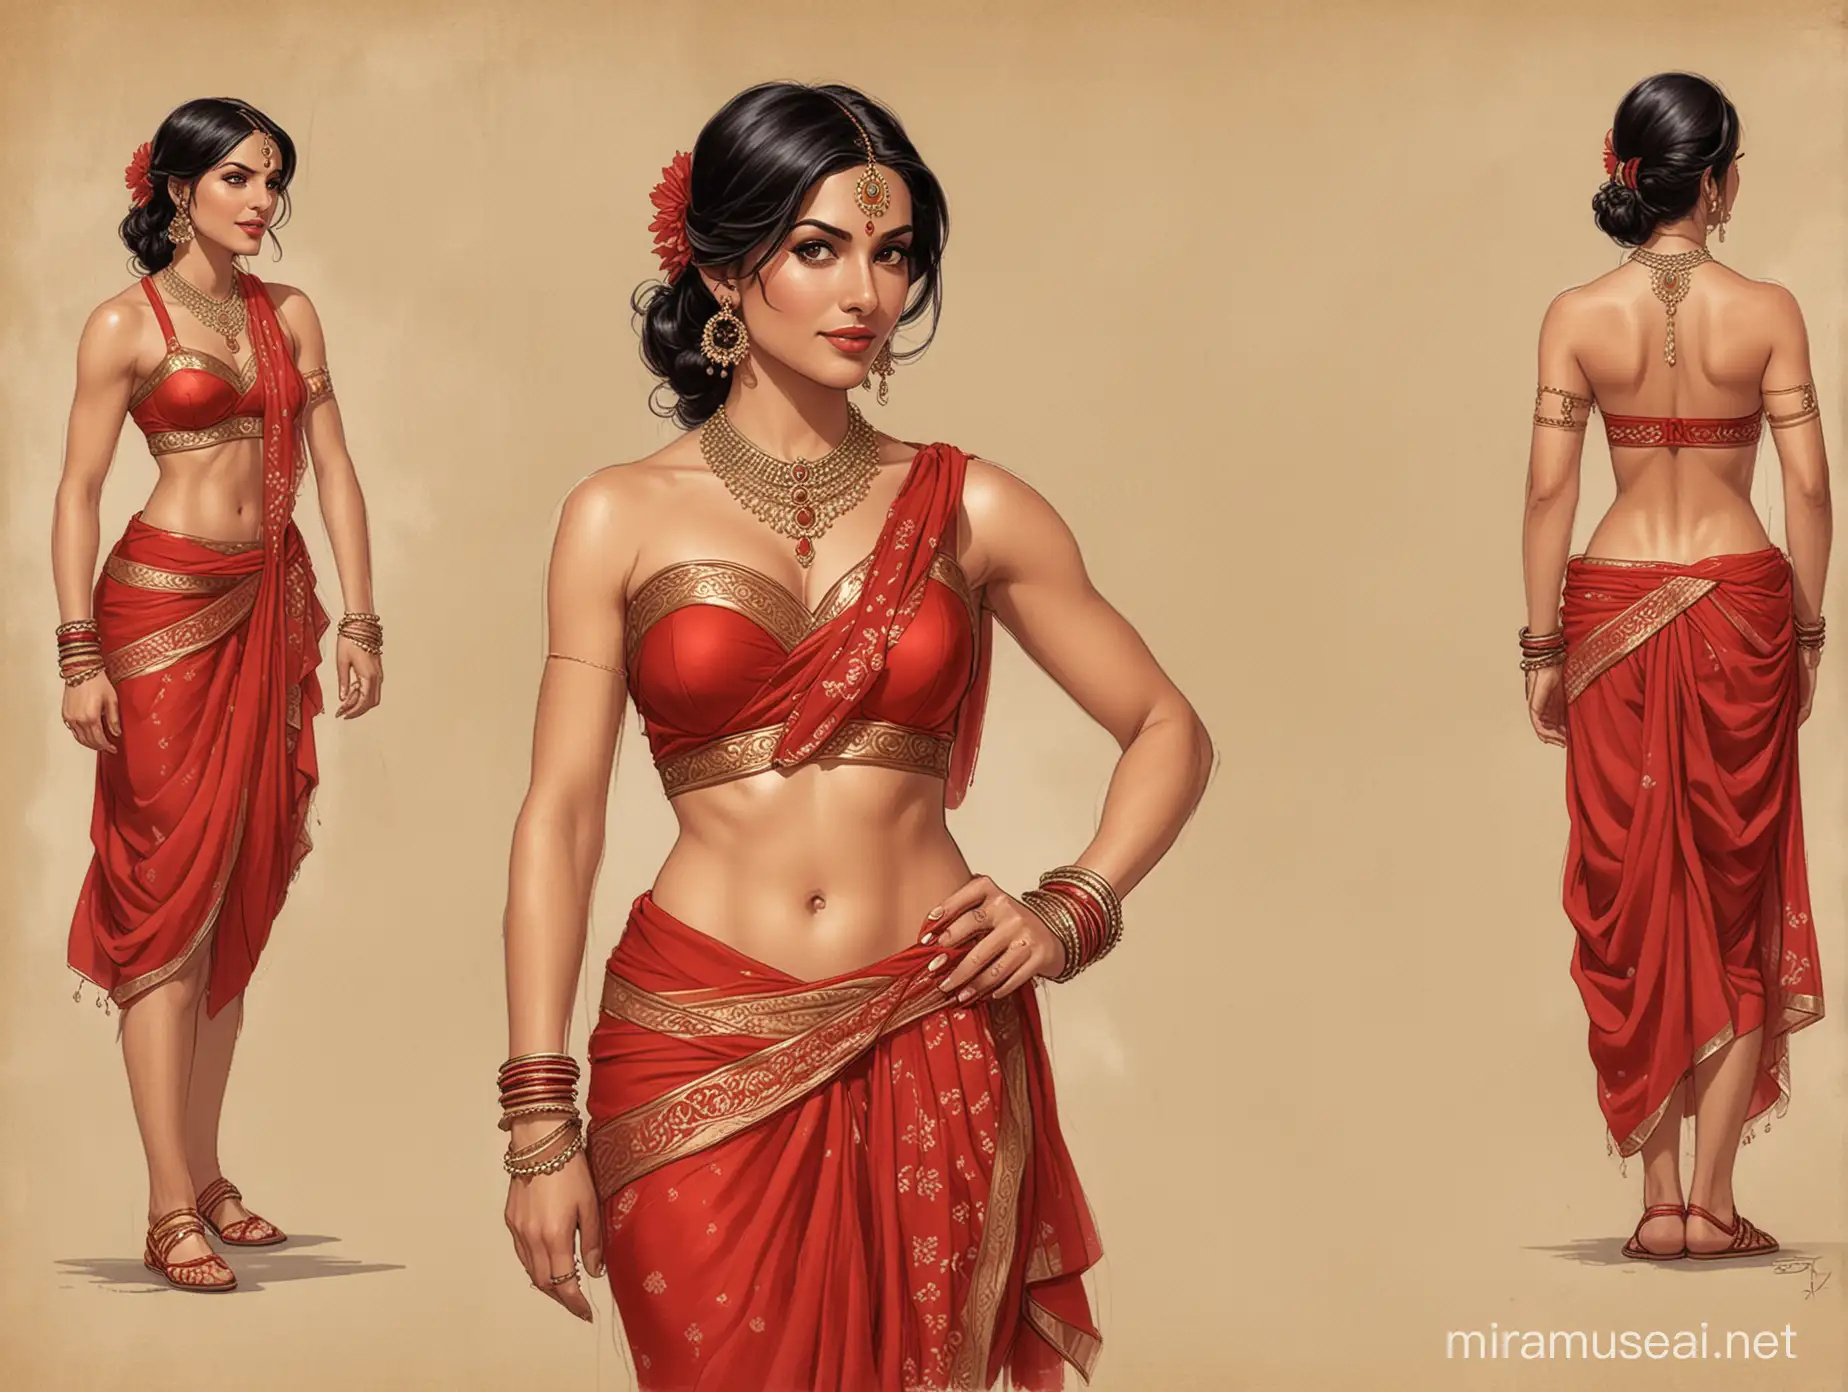 generate an illustration art style image of Diana Palmer Walker(Comics characteer, drawn by Sy Barry), wearing traditional bandeau red lingerie, red saree and red Indian Sheer dhoti, with appropriate accessories such as bangles, armlets and a bindi, while maintaining her recognizable features and elegance.. full body image.